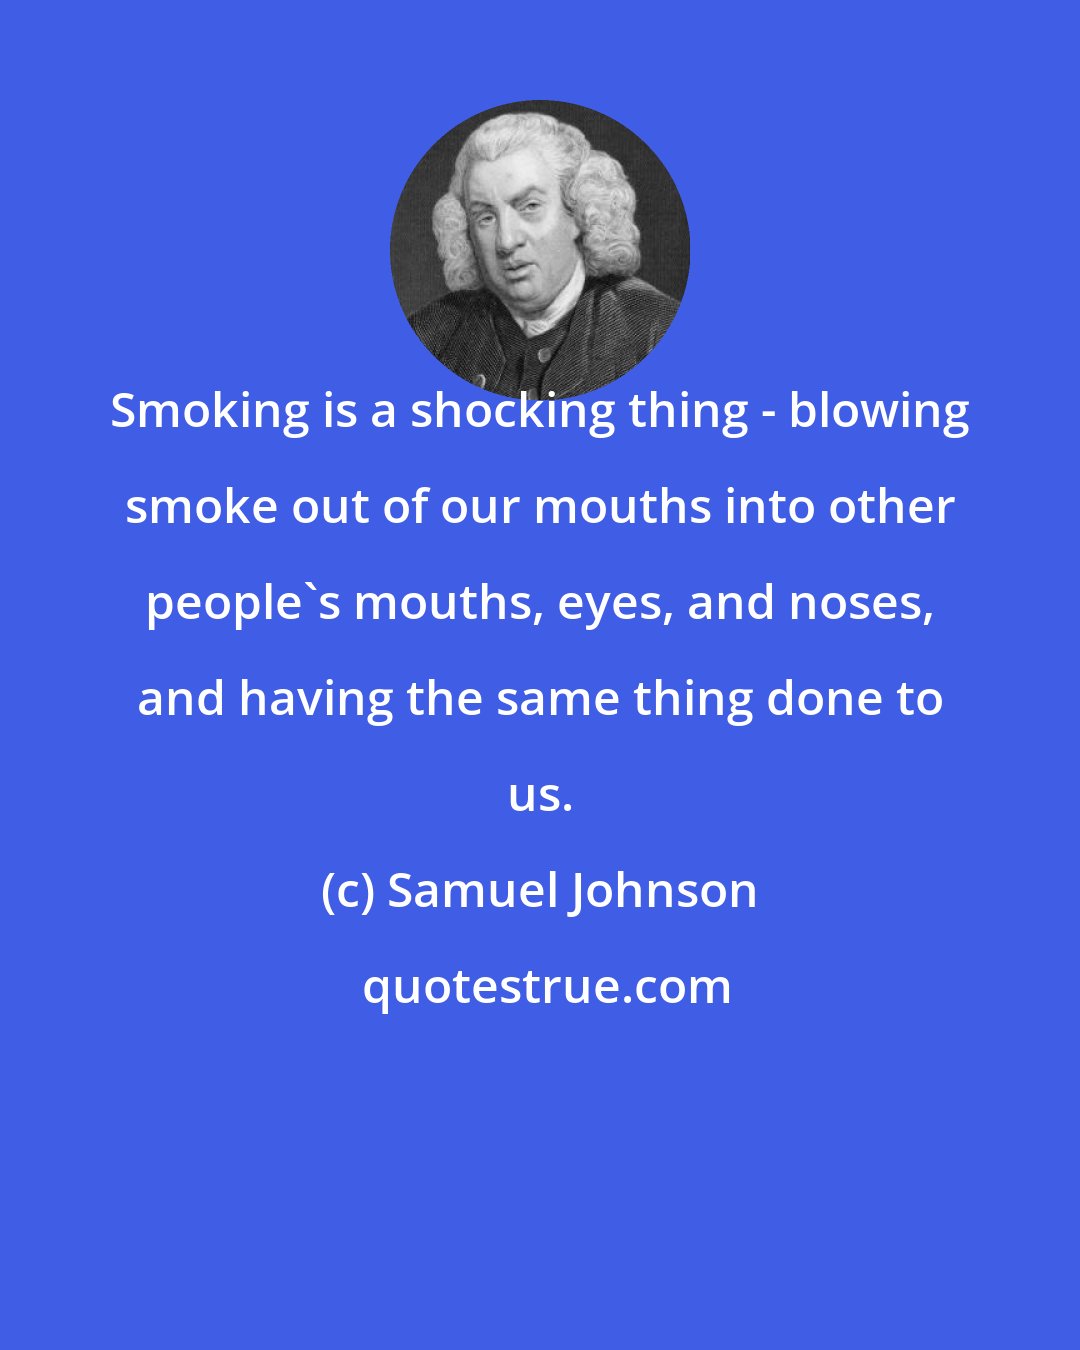 Samuel Johnson: Smoking is a shocking thing - blowing smoke out of our mouths into other people's mouths, eyes, and noses, and having the same thing done to us.